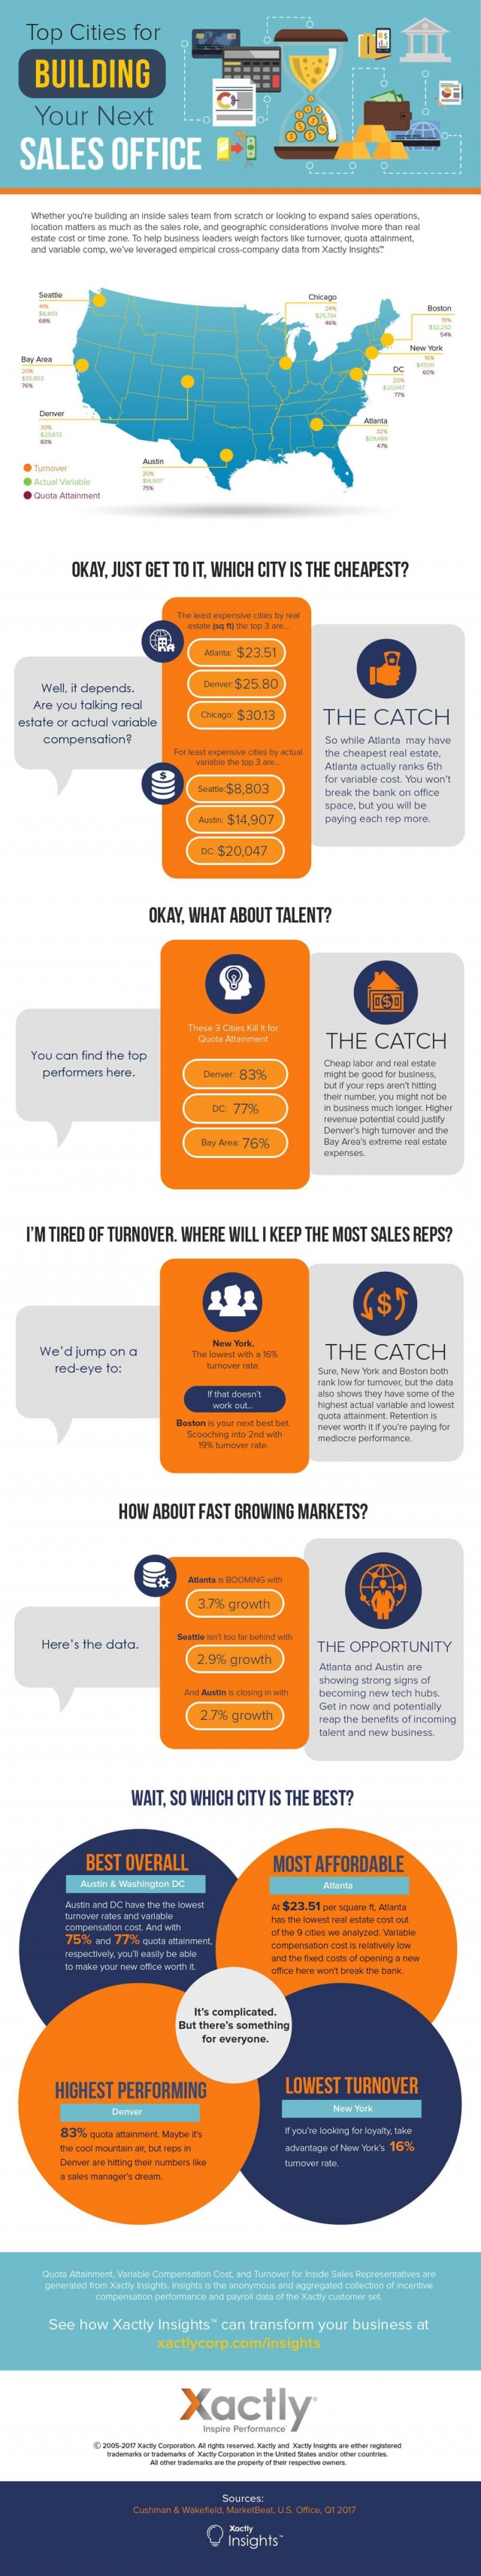 Top Cities for Building Your Next Sales Office Infographic